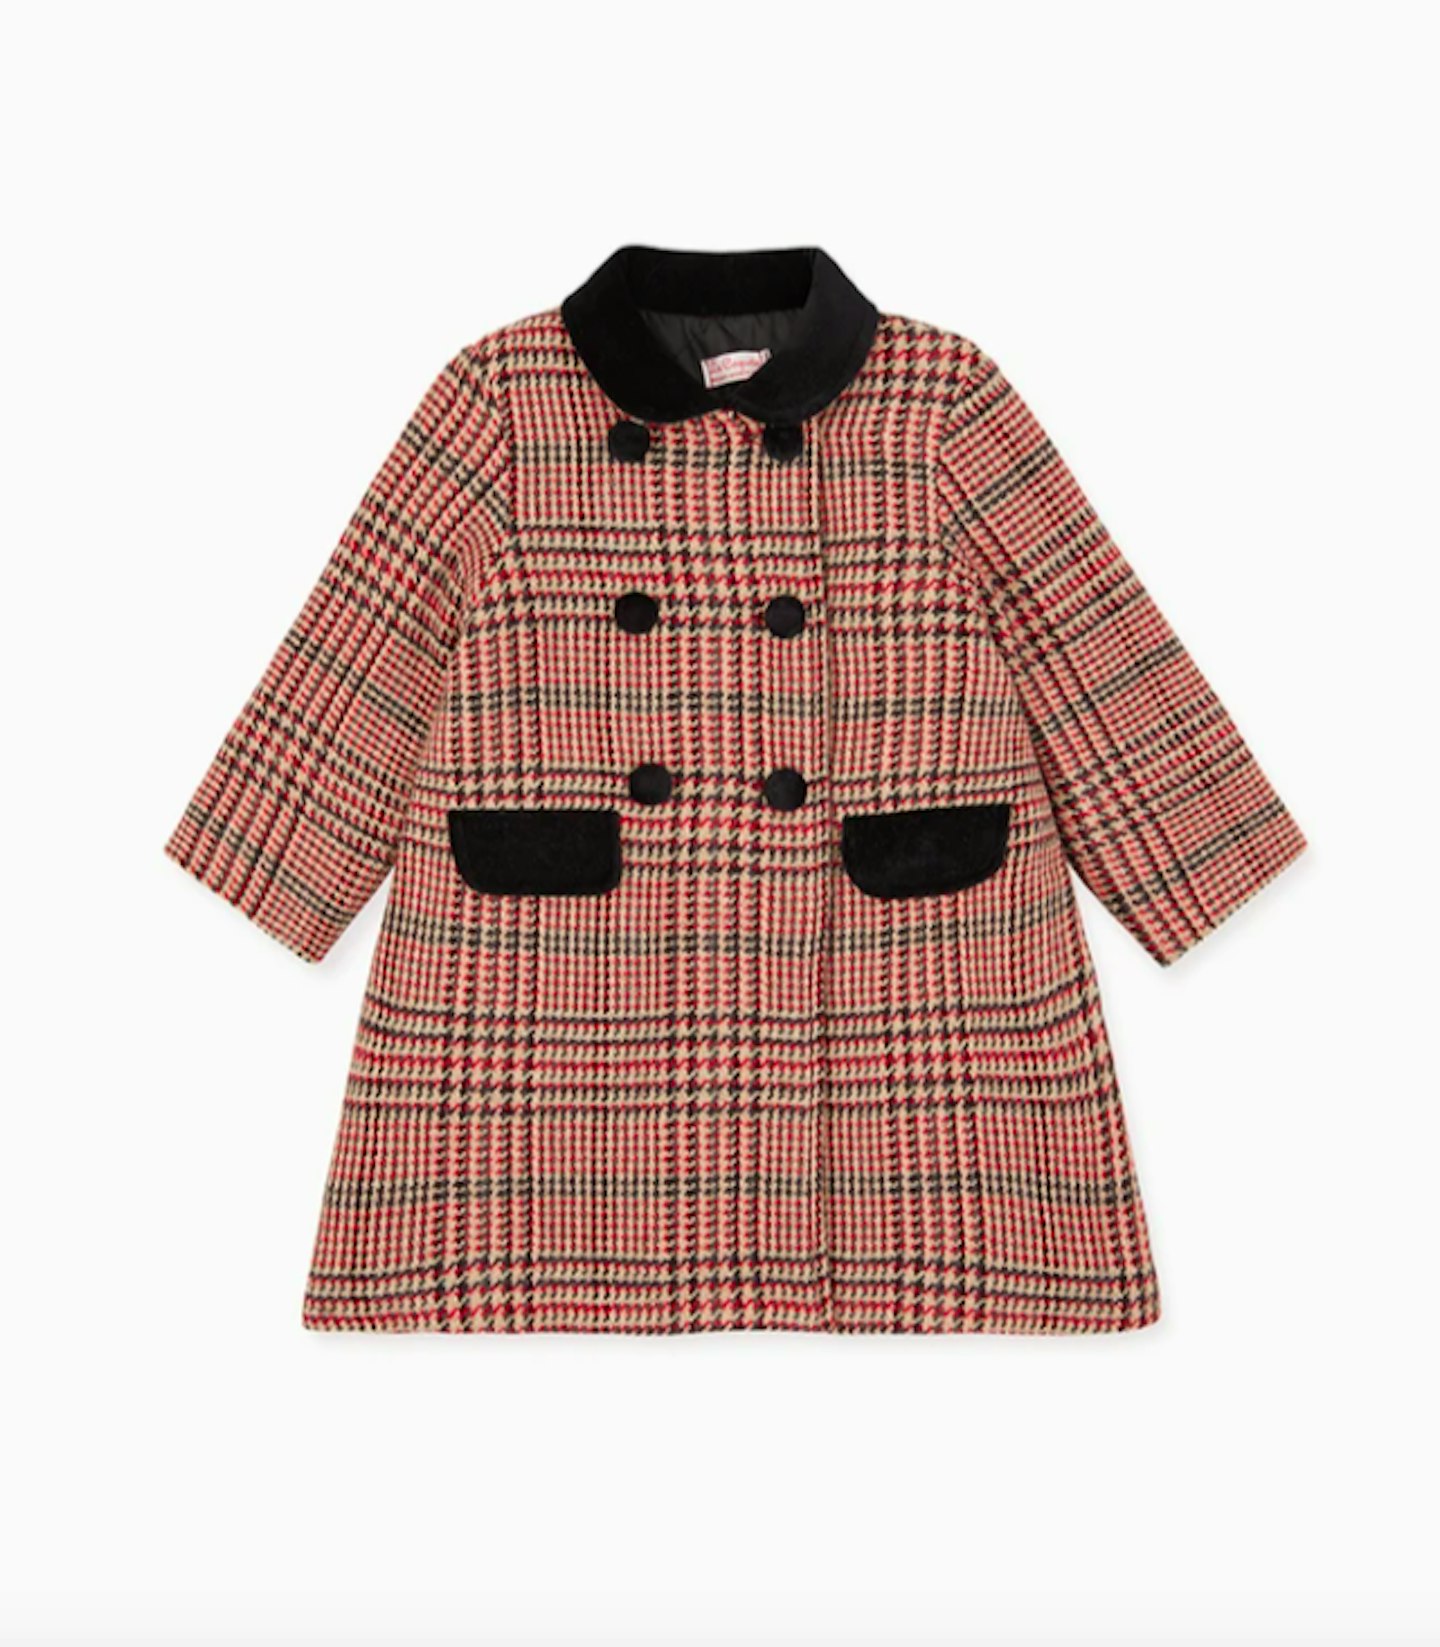 The Best Children's Coats To Keep Your Little Ones Snug This Winter